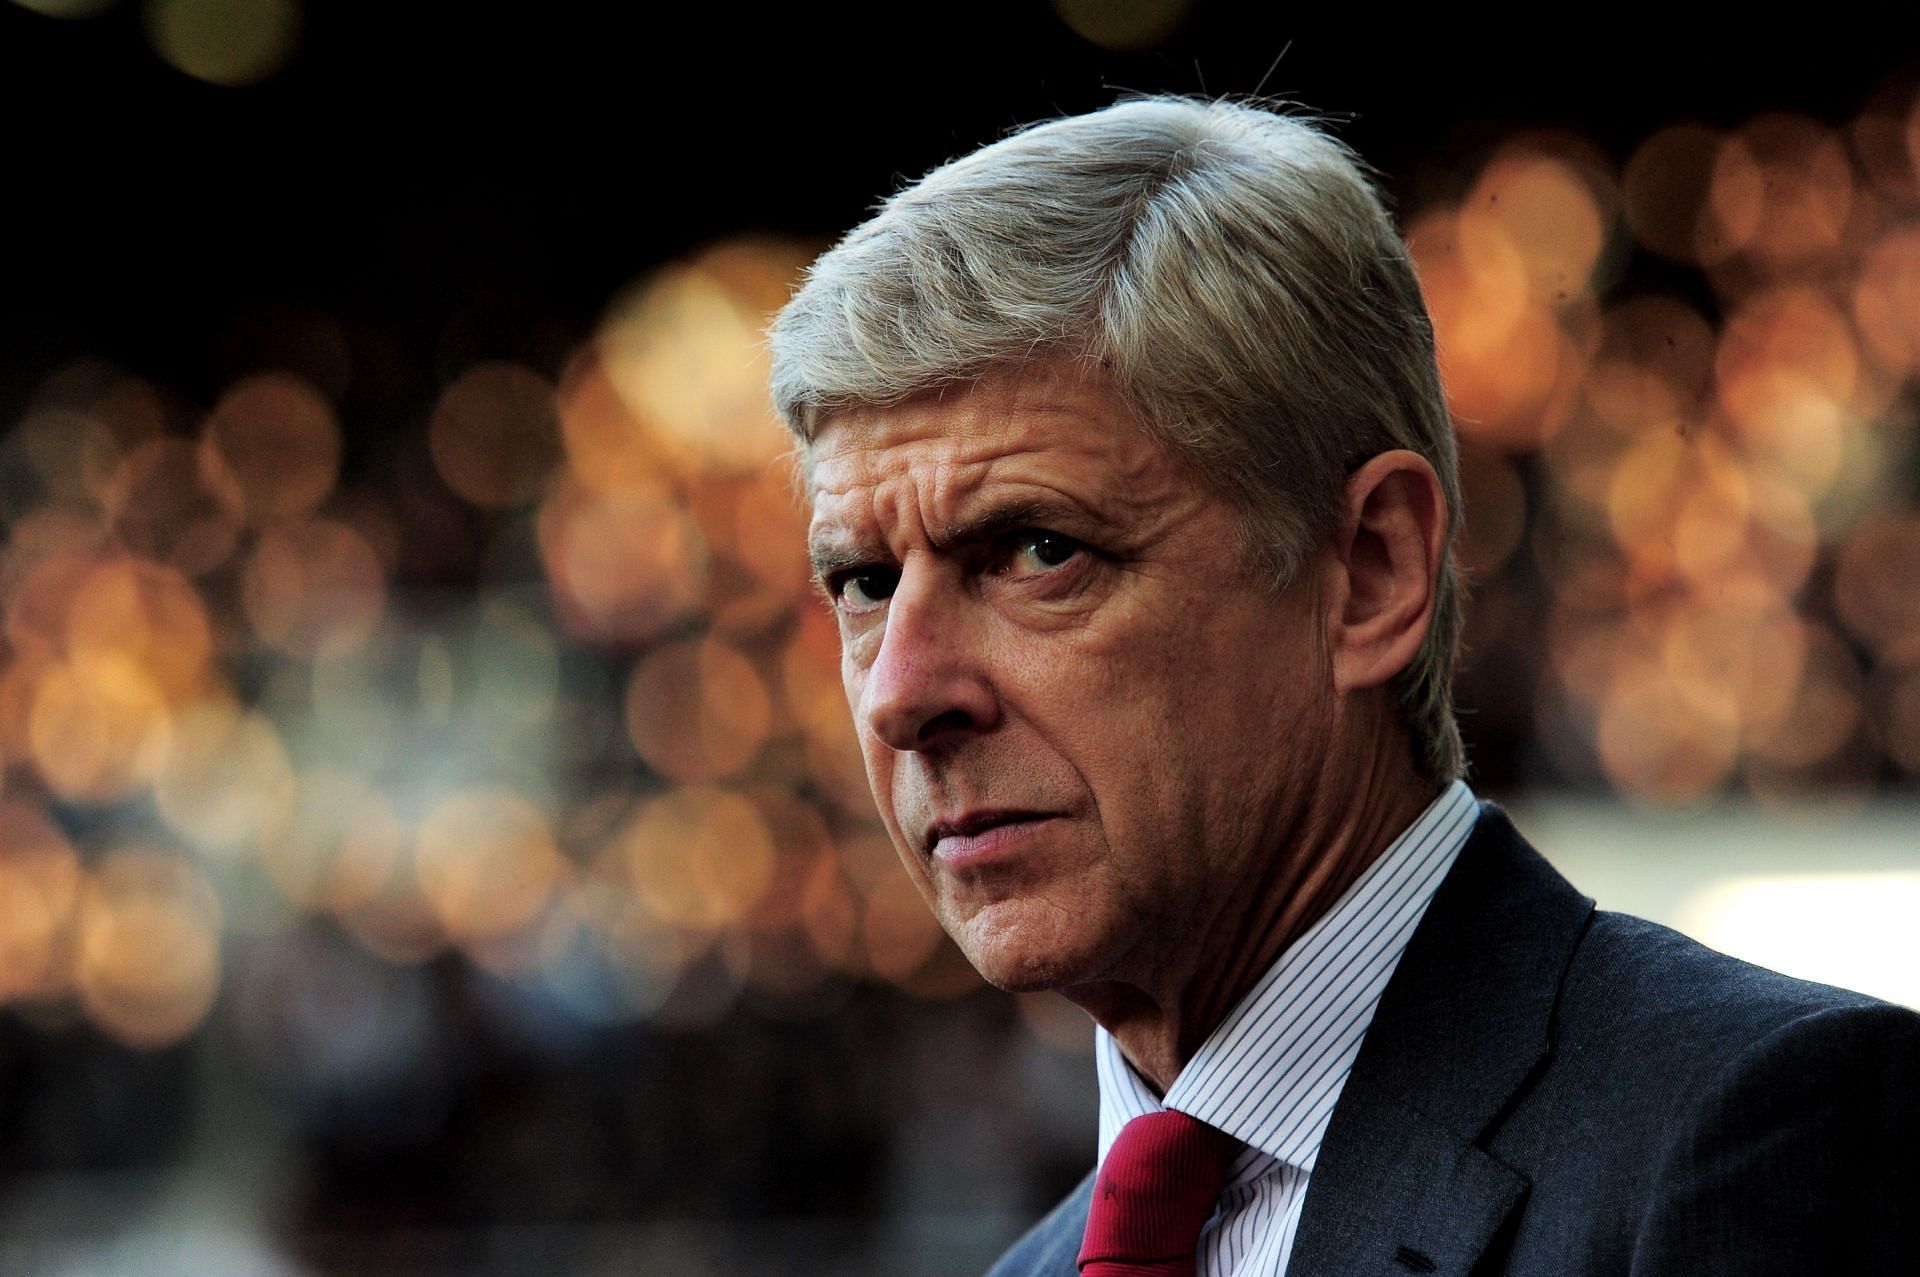 Arsene Wenger was fondly known as &#039;Le Professeur&#039; for his calculated and scientific approach to football.